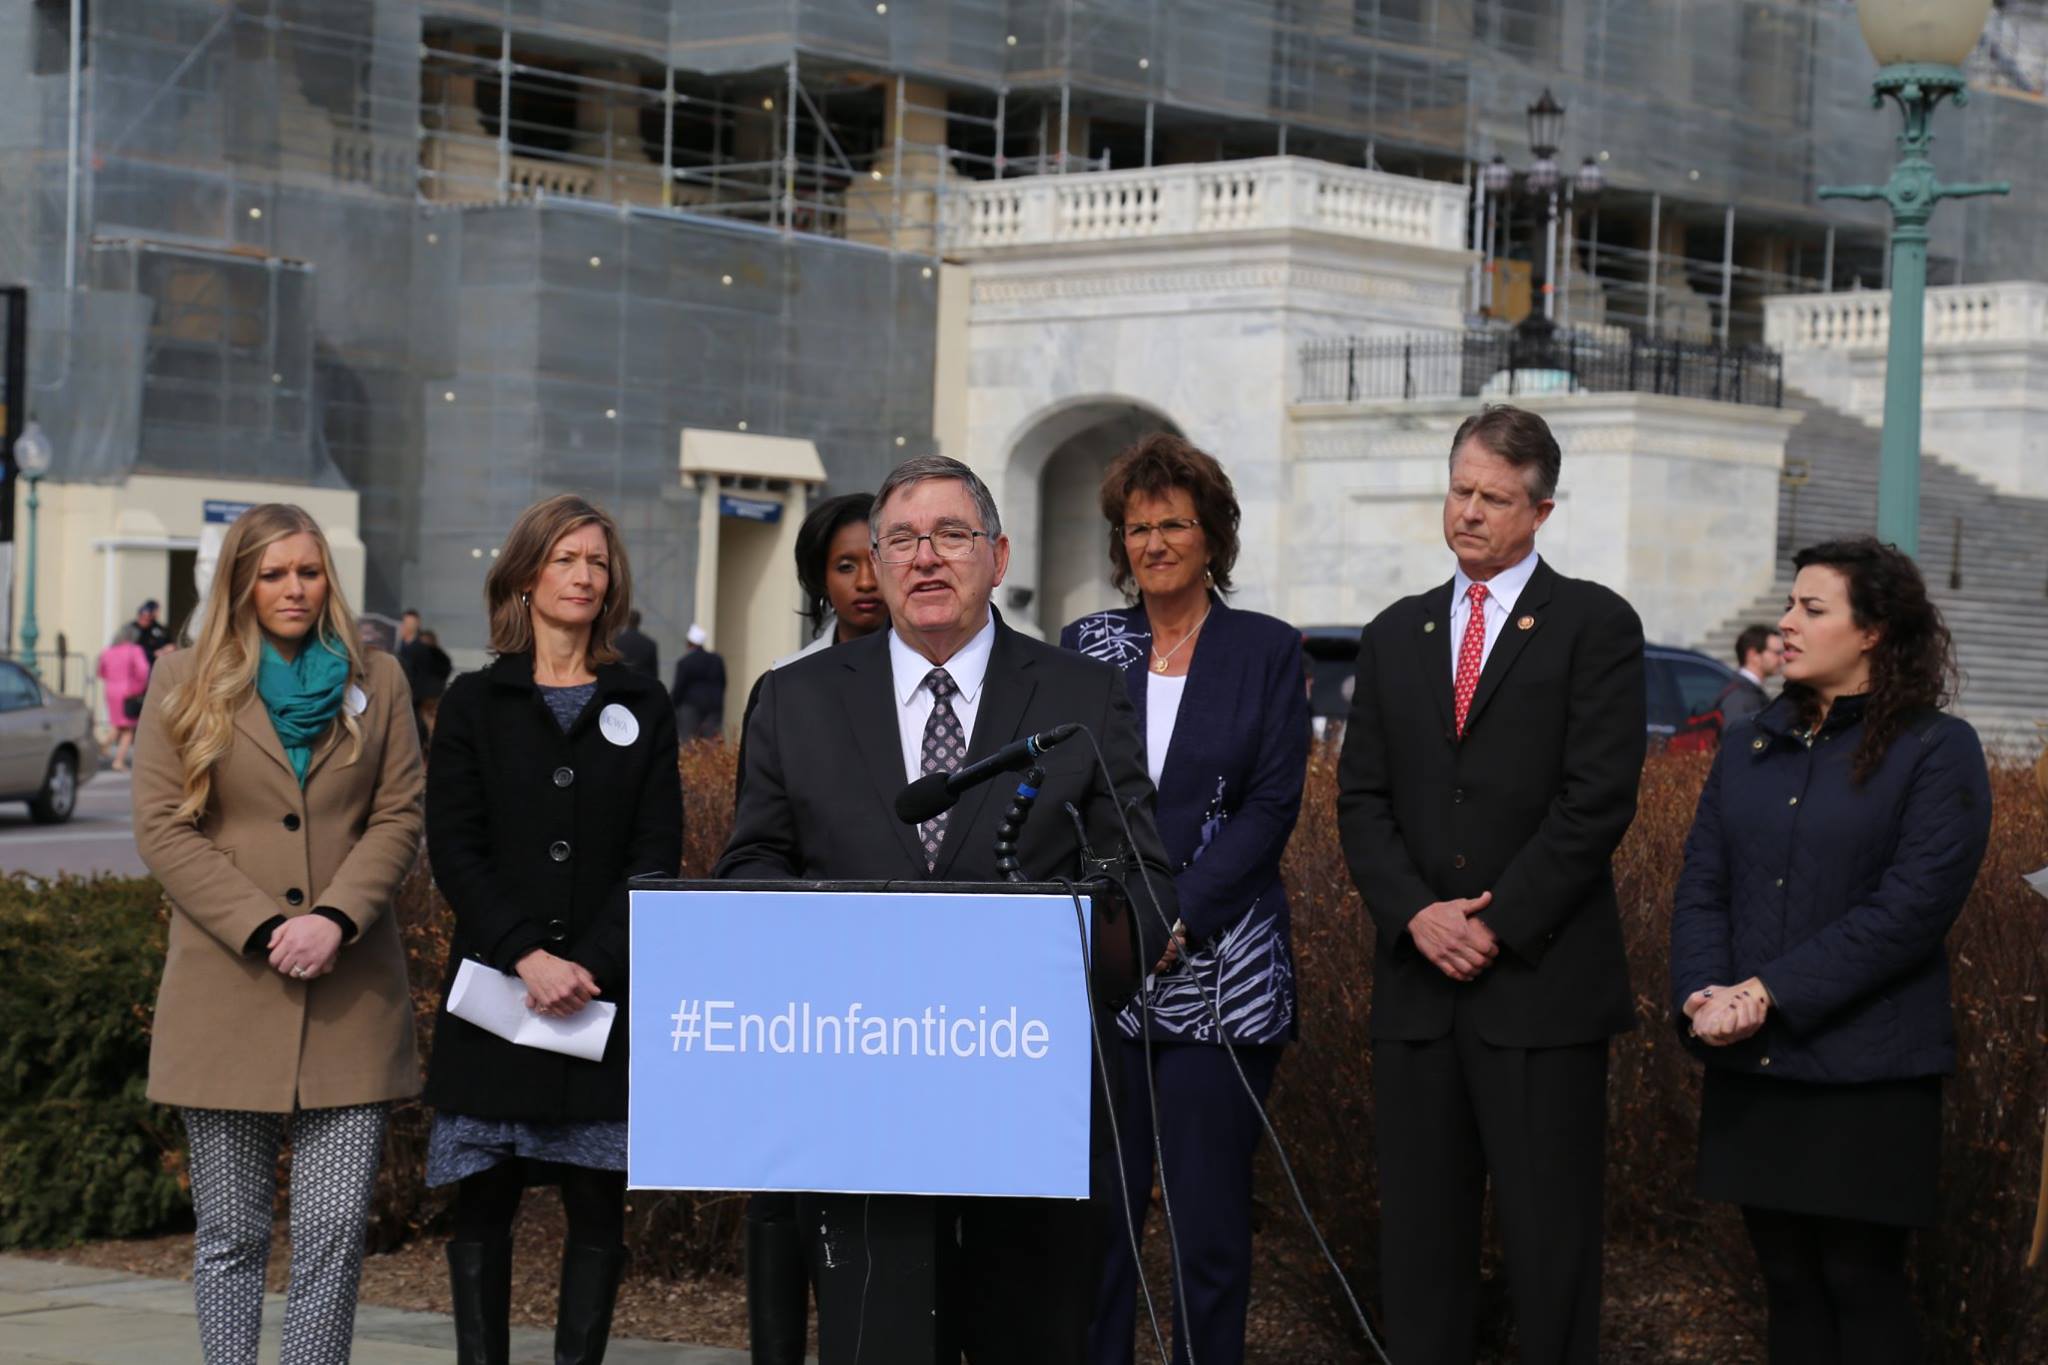 U.S. Representative Michael Burgess at a press conference for the Survivors Protection Act in February. The bill failed.